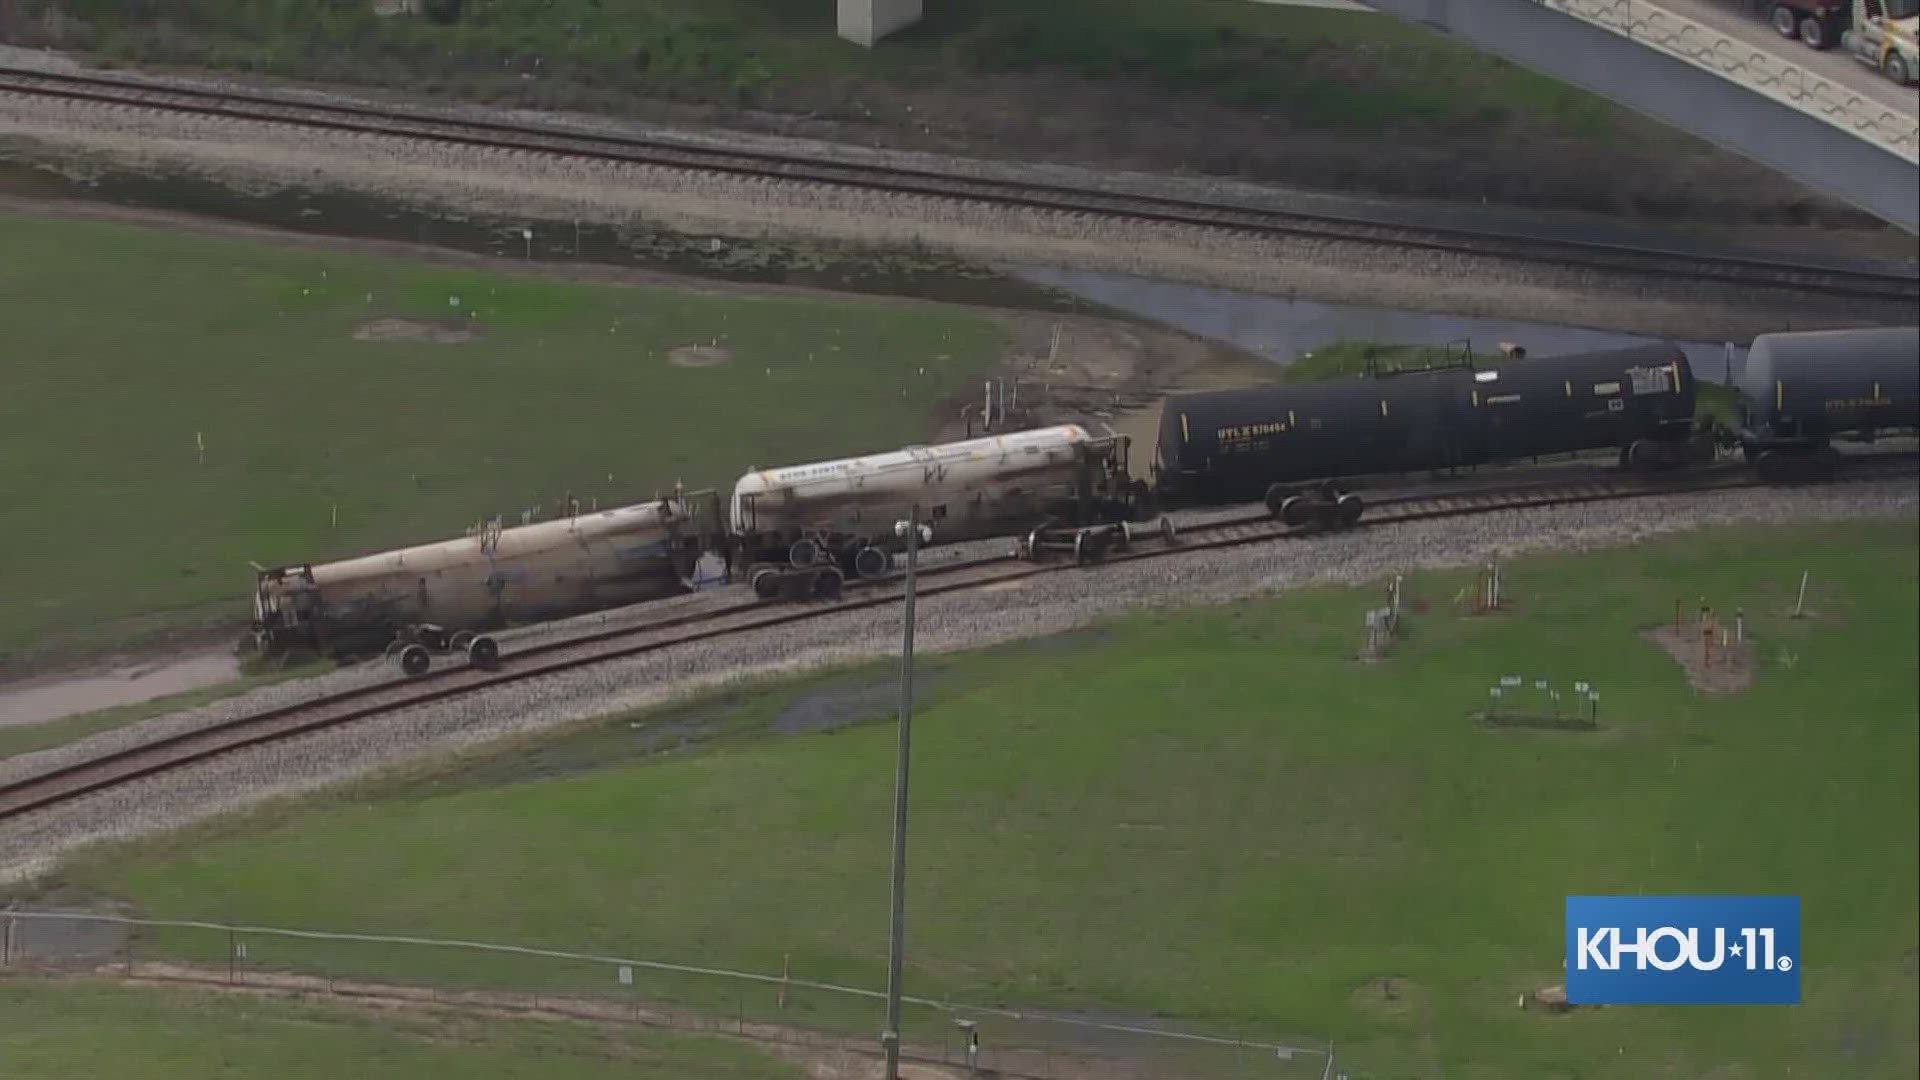 Air 11 was over the scene of a train derailment in the Seabrook area.